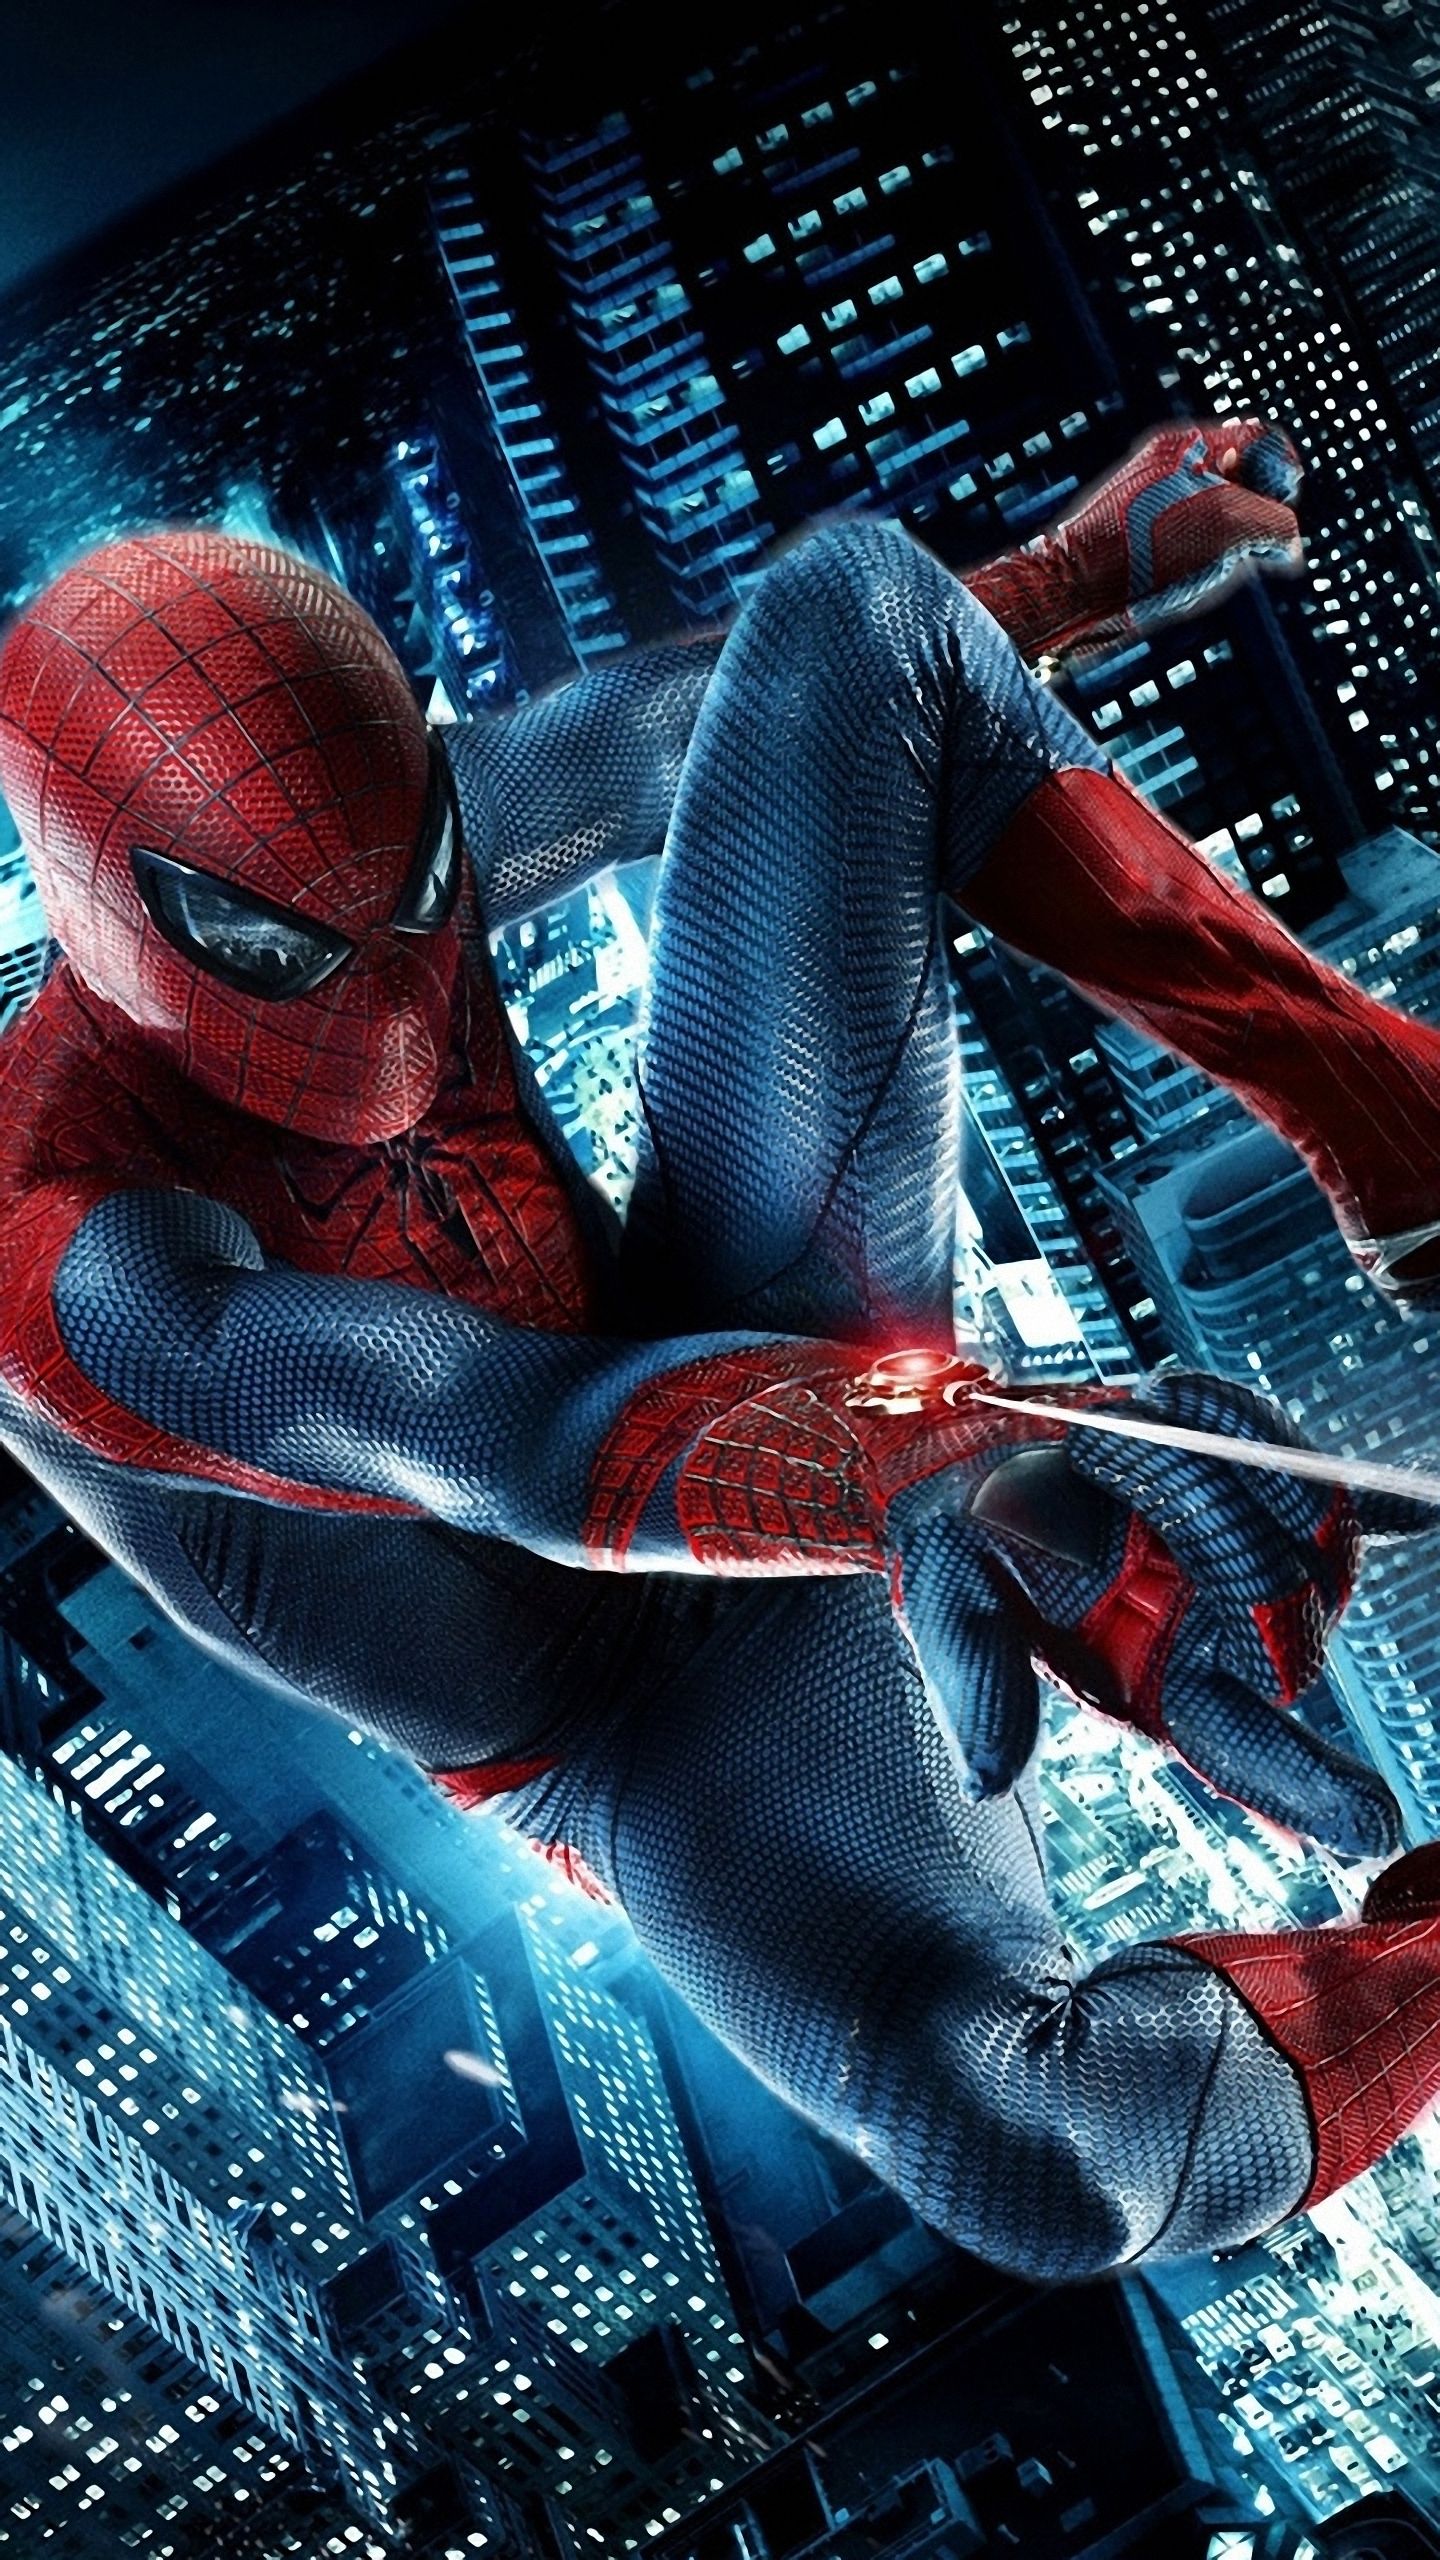 The Amazing Spiderman 2 lg g3 Wallpapers HD 1440x2560